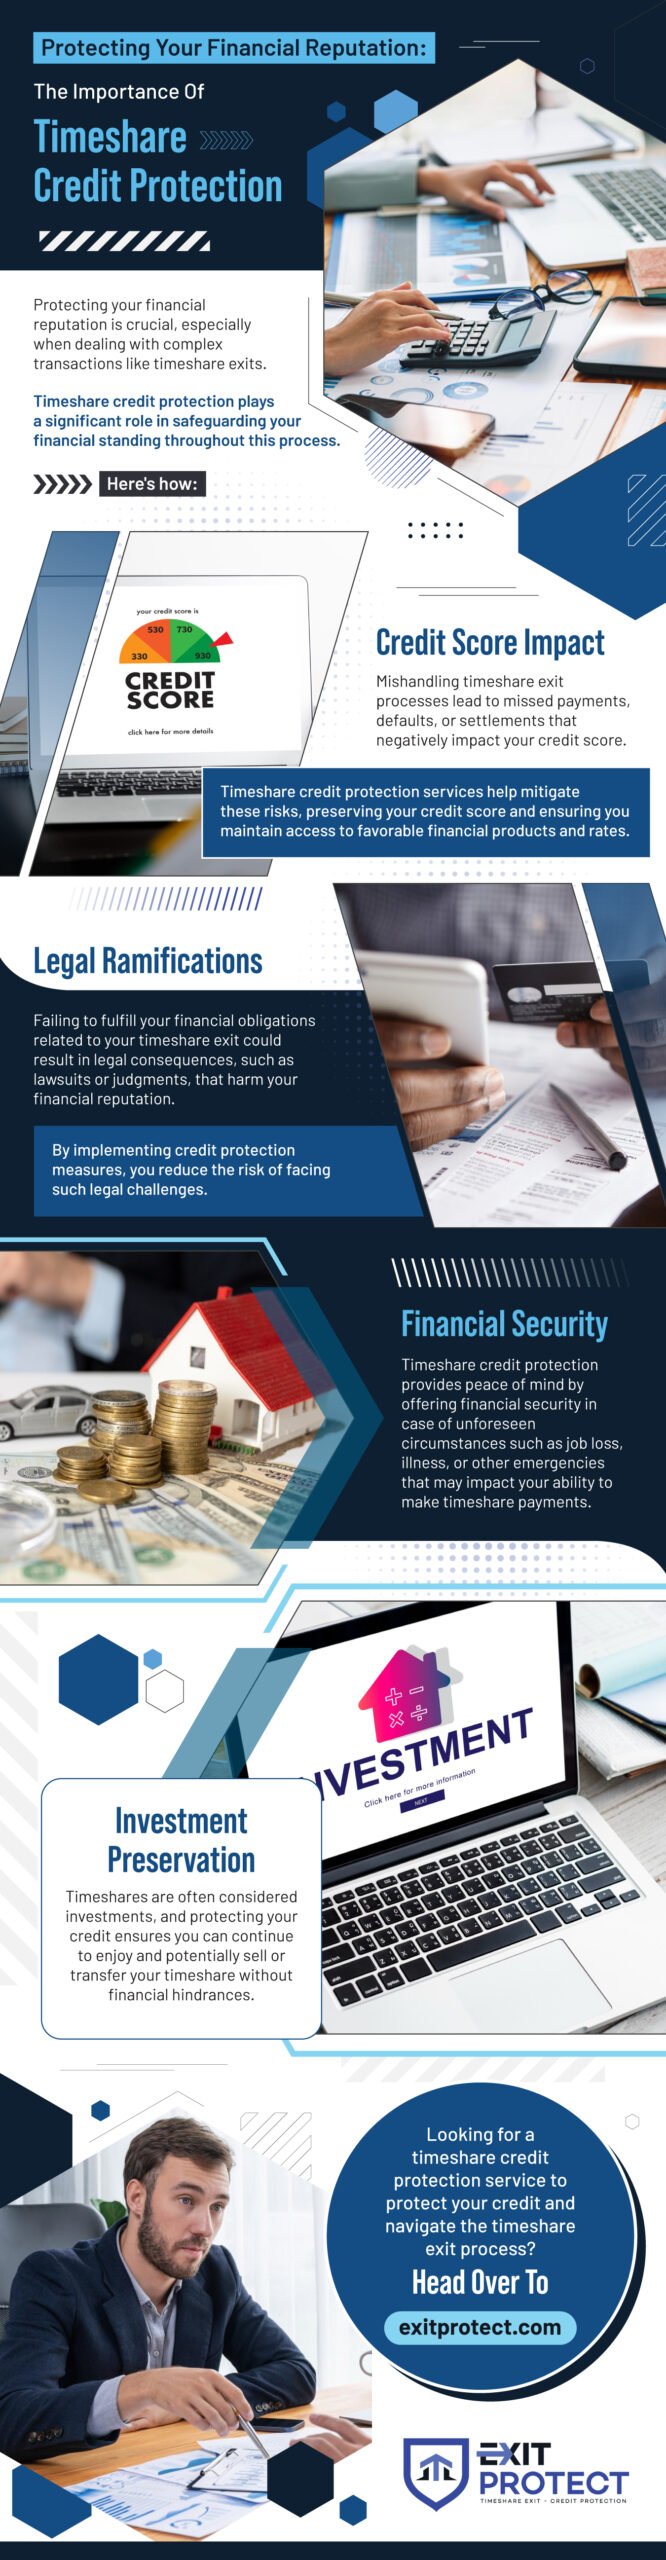 Protecting Your Financial Reputation